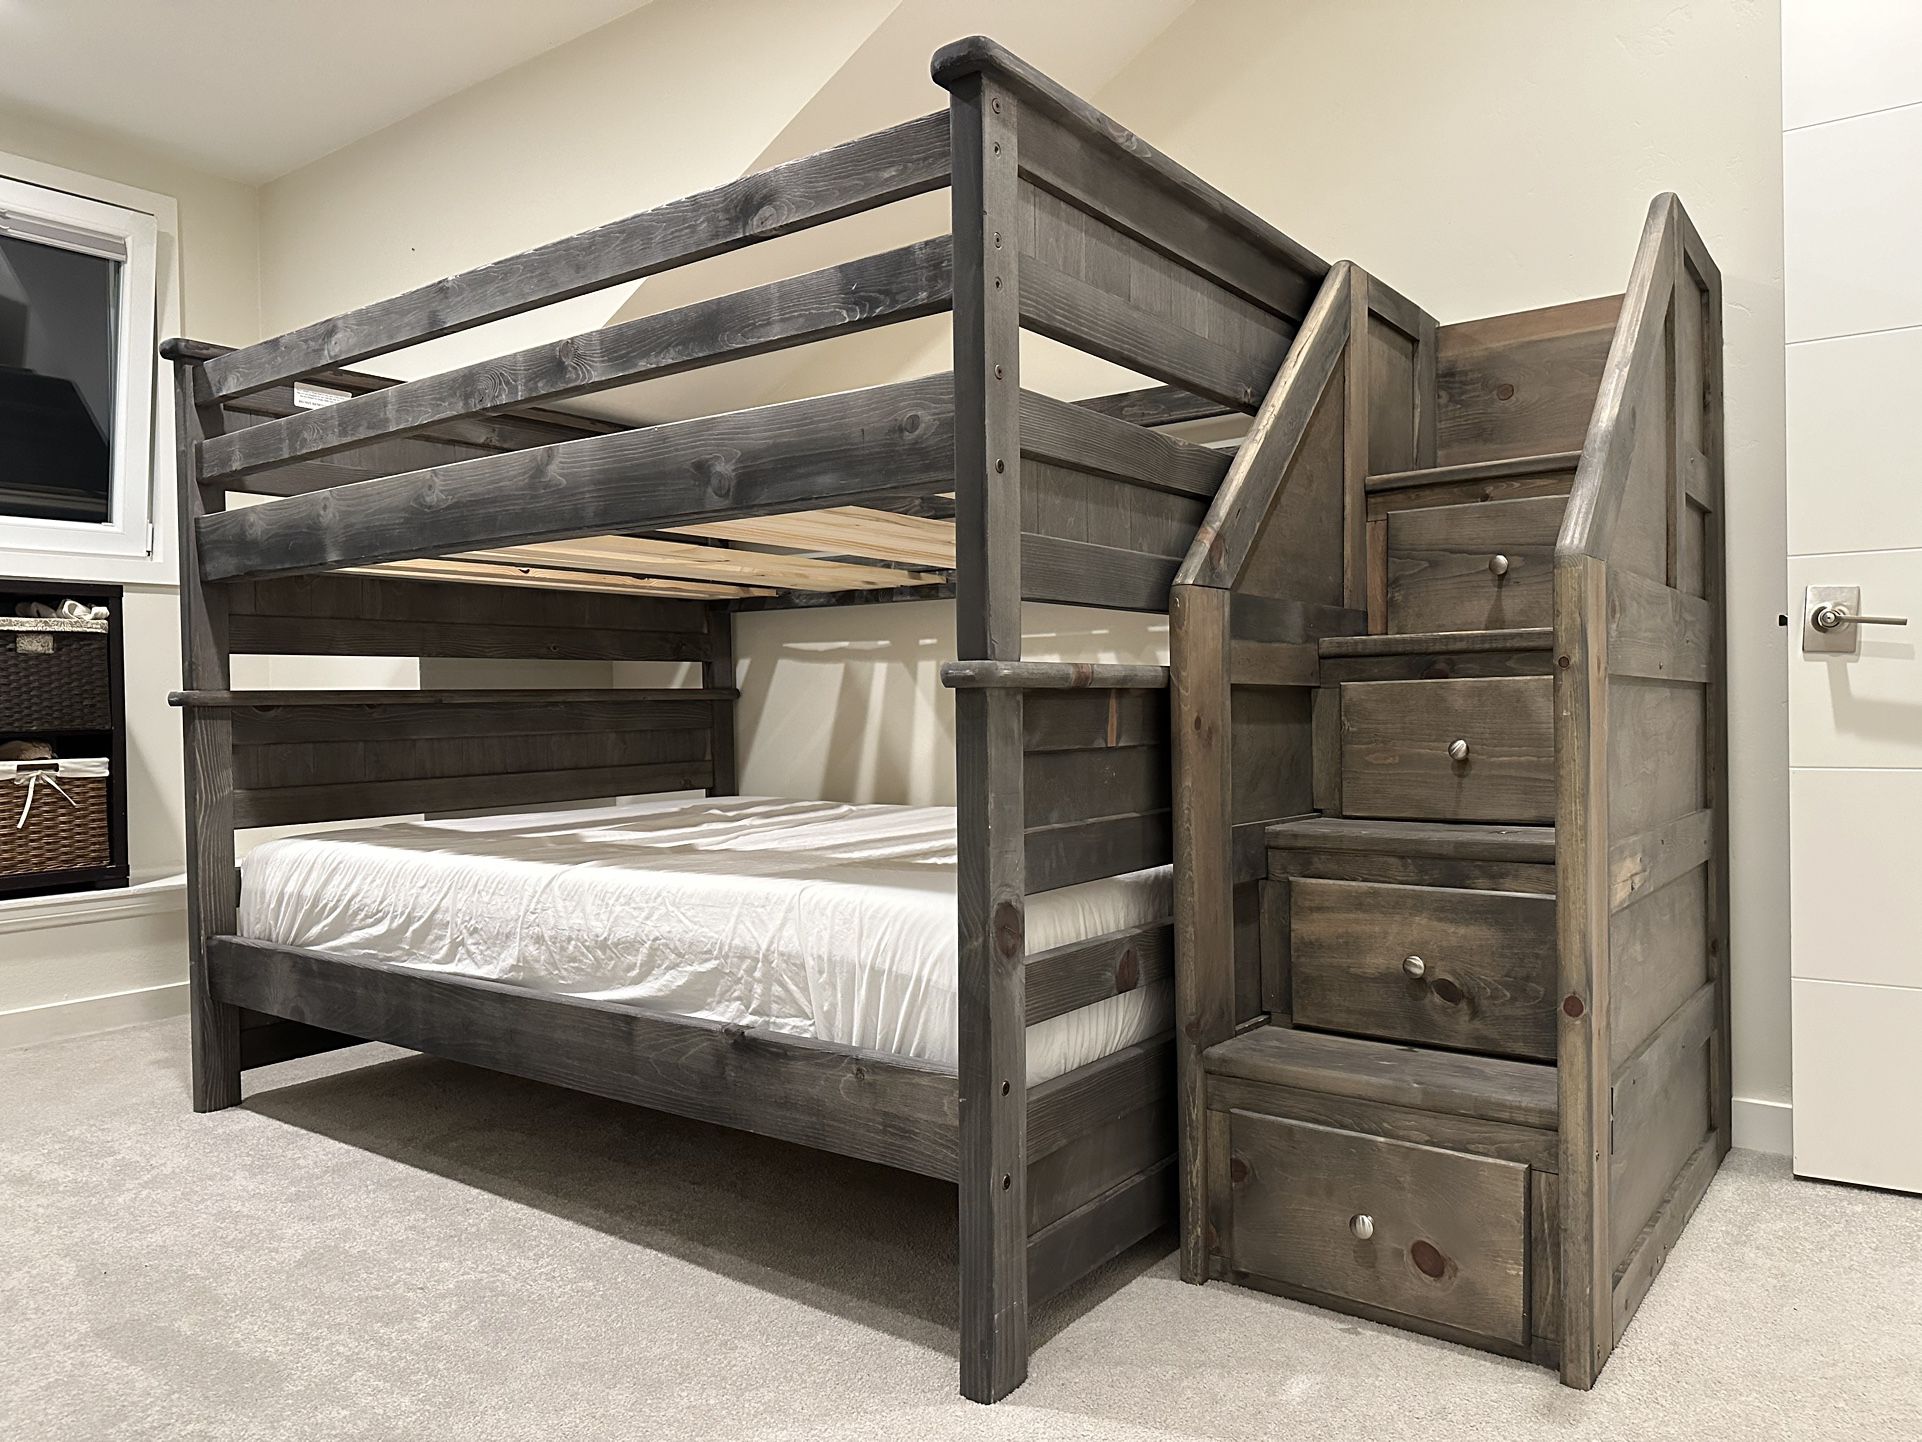 Full Over Full Bunk Beds from Living spaces